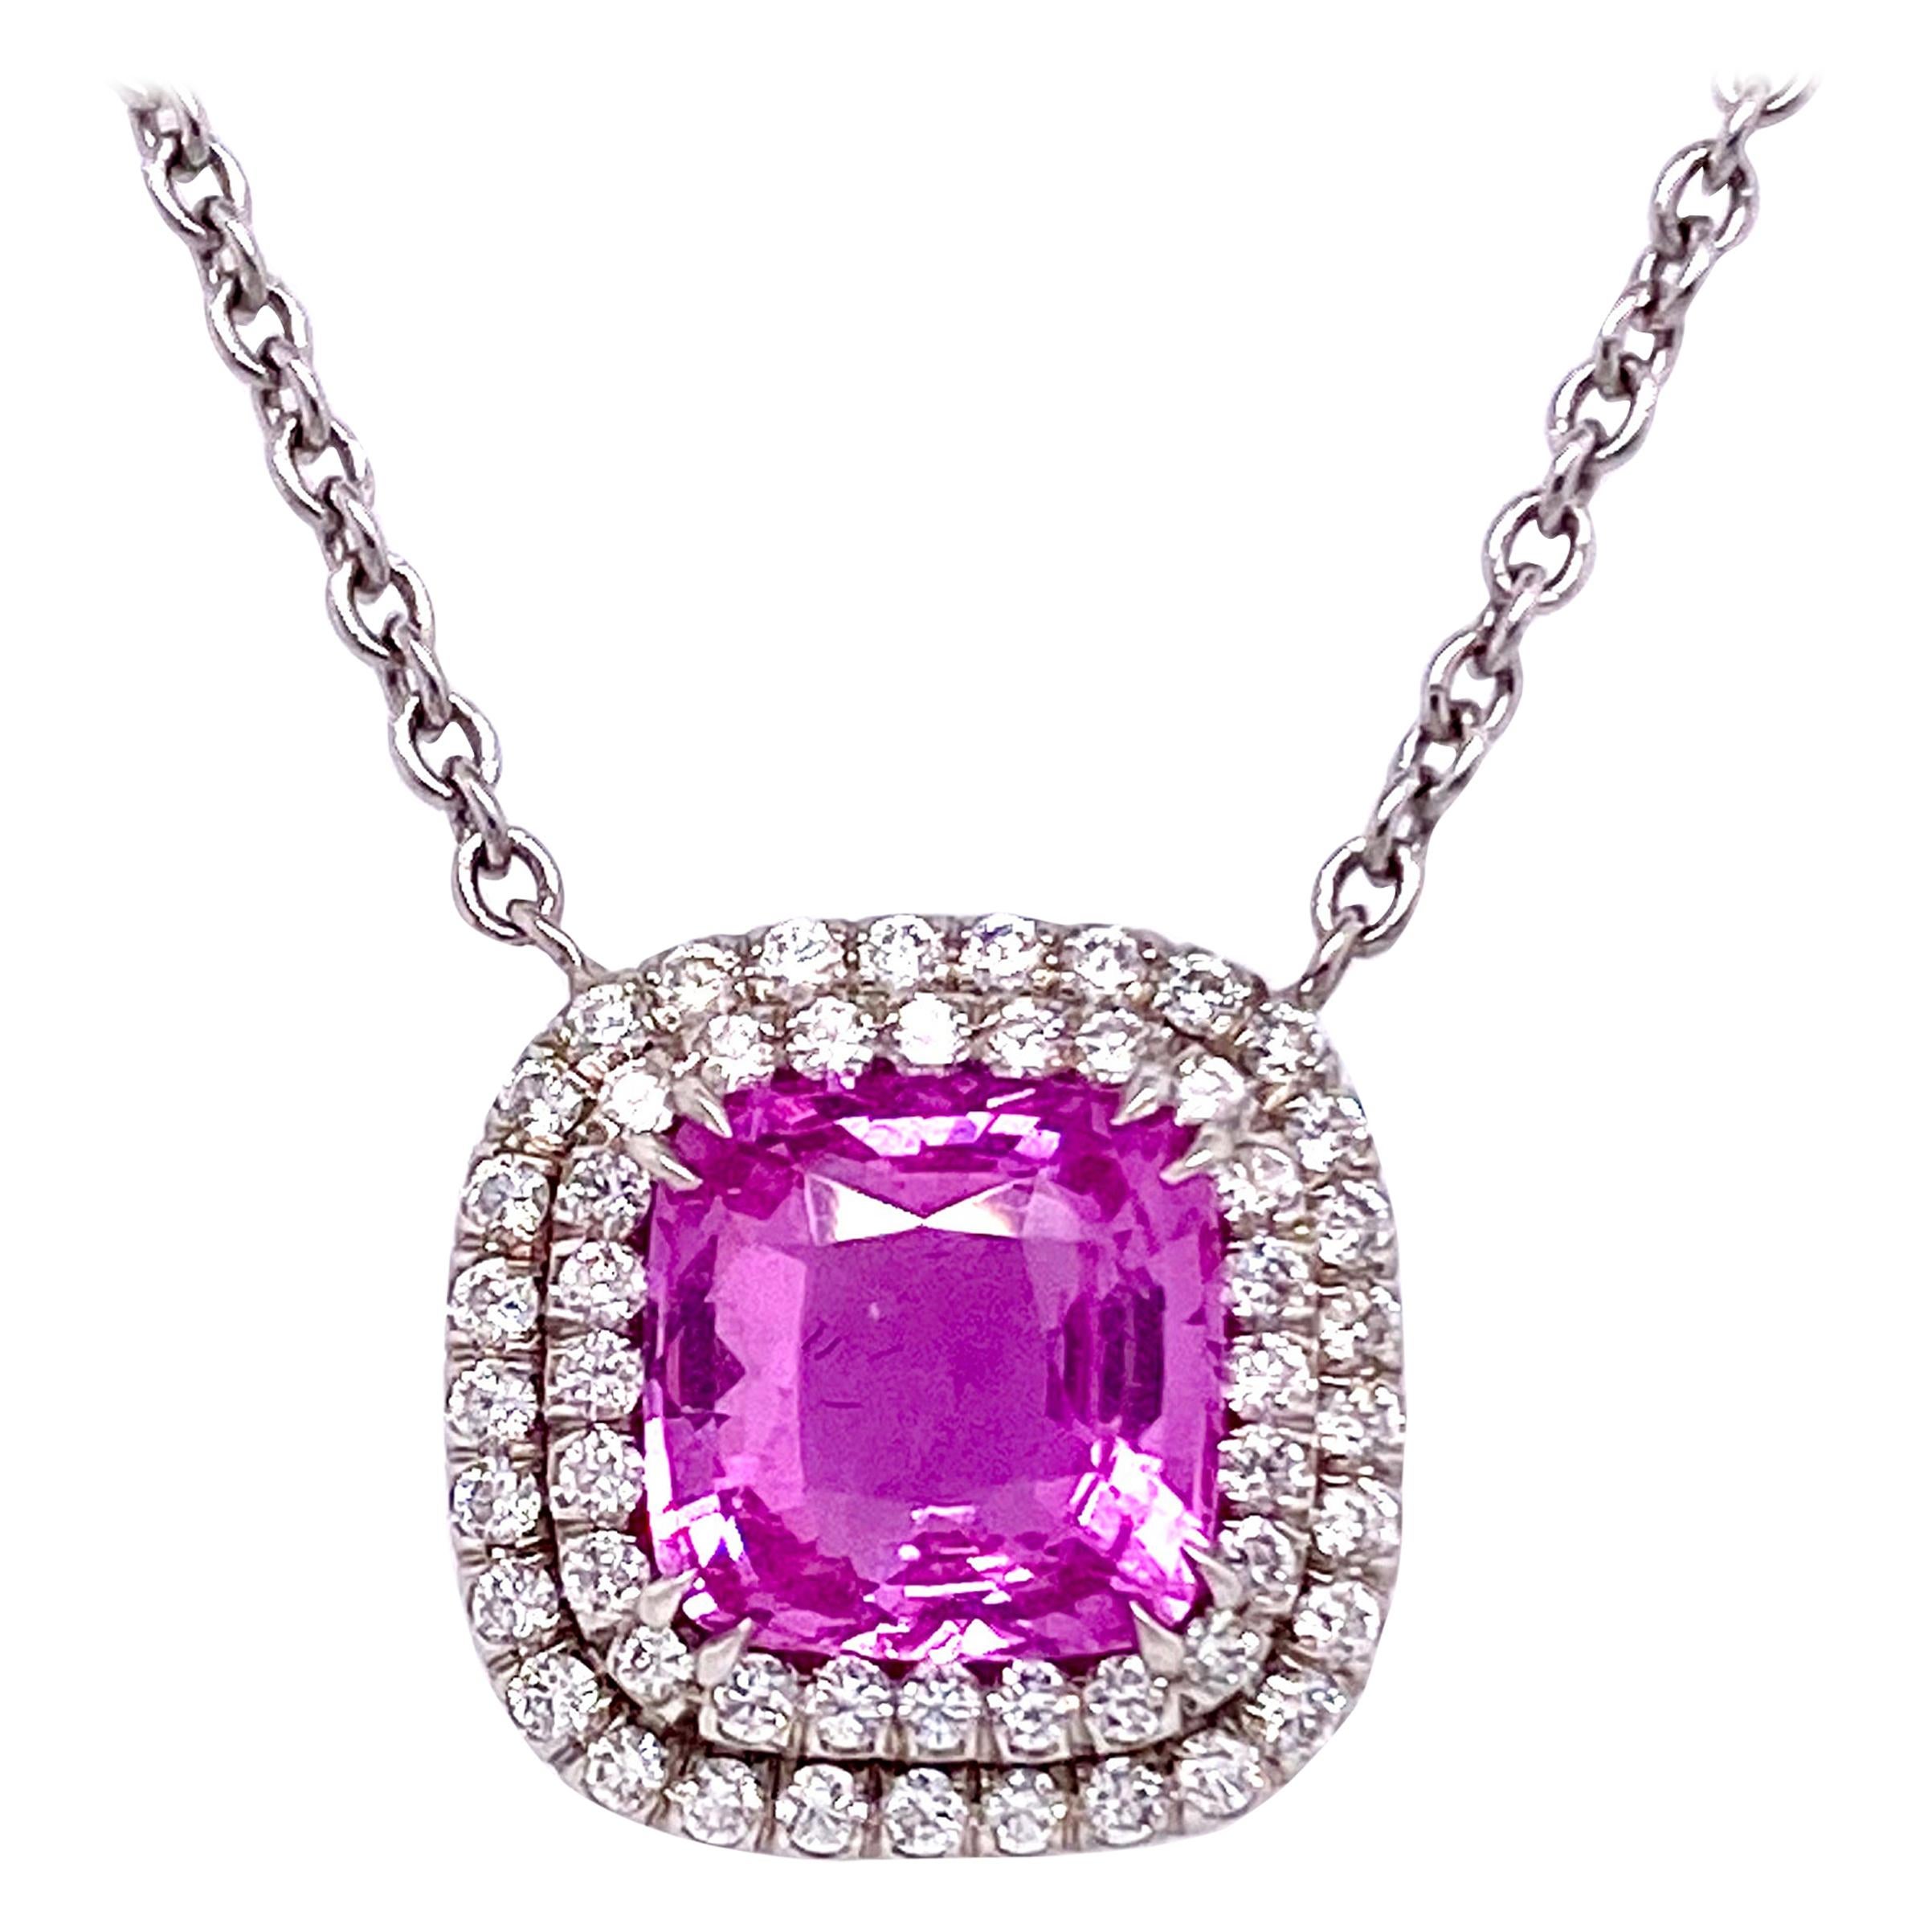 2.58 Carat Pink Sapphire and Diamond Halo Necklace with Platinum Chain